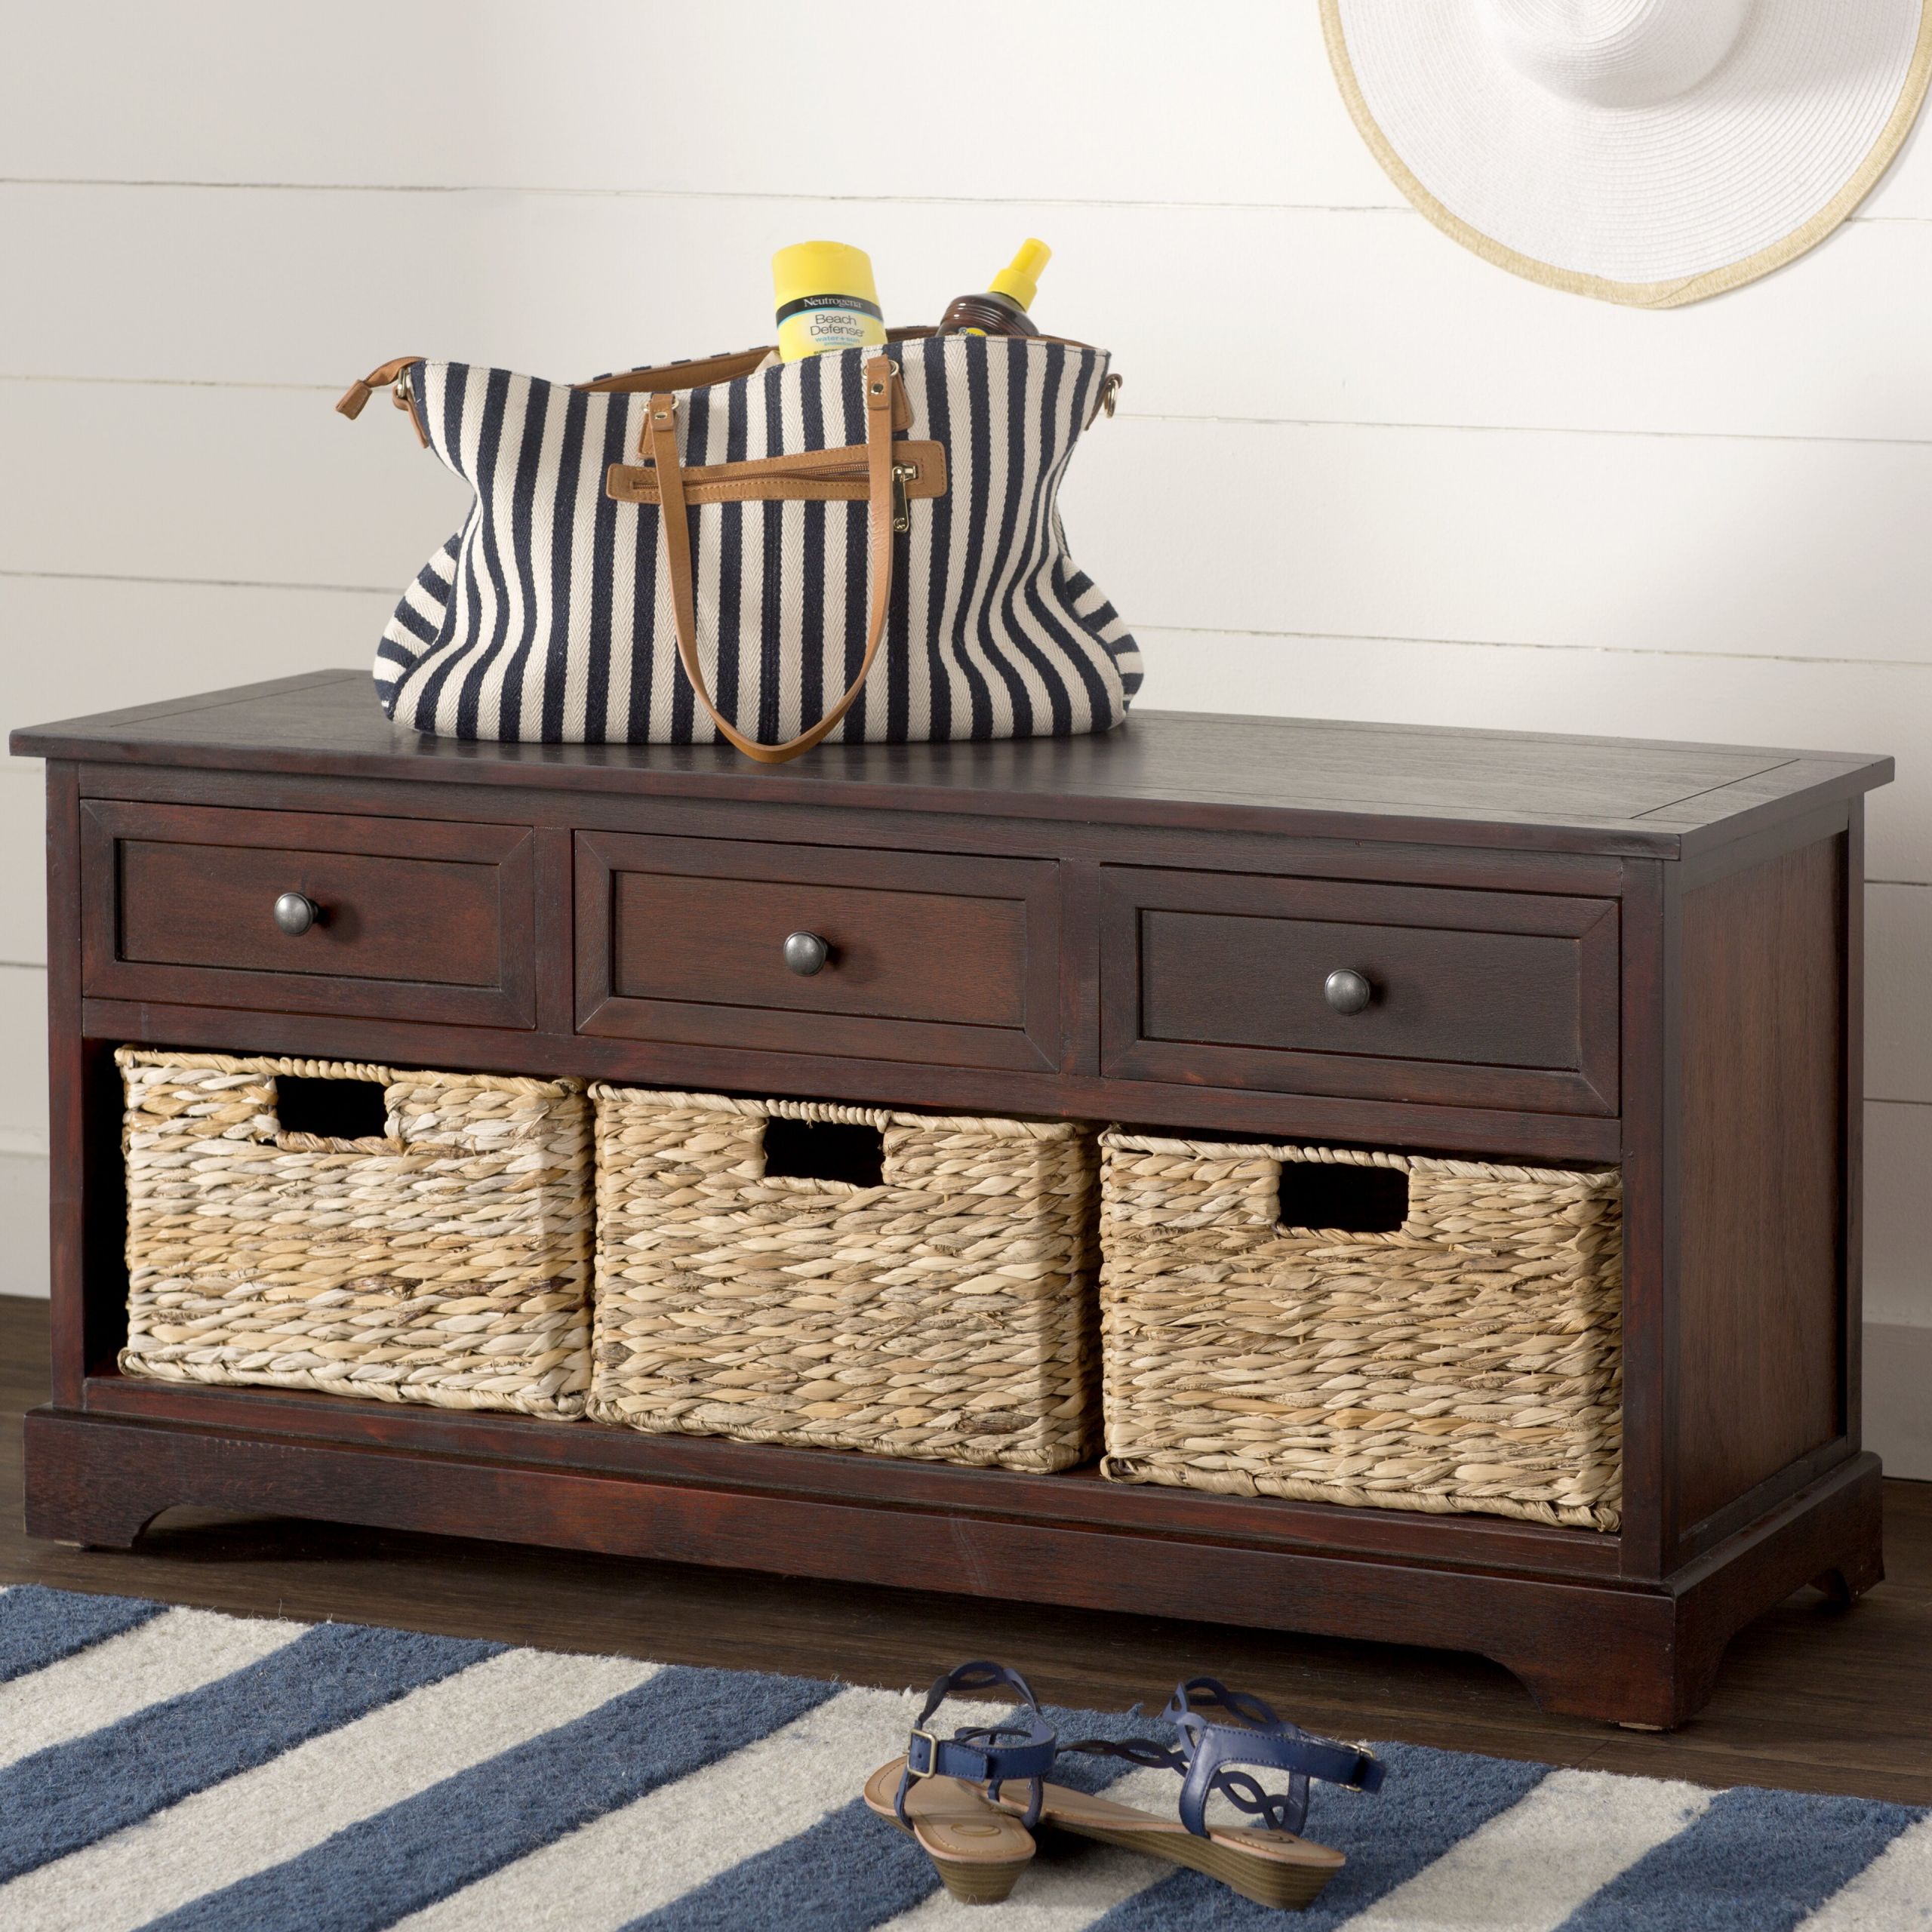 Entry Bench With Storage
 Breakwater Bay Lady Lake Storage Entryway Bench & Reviews